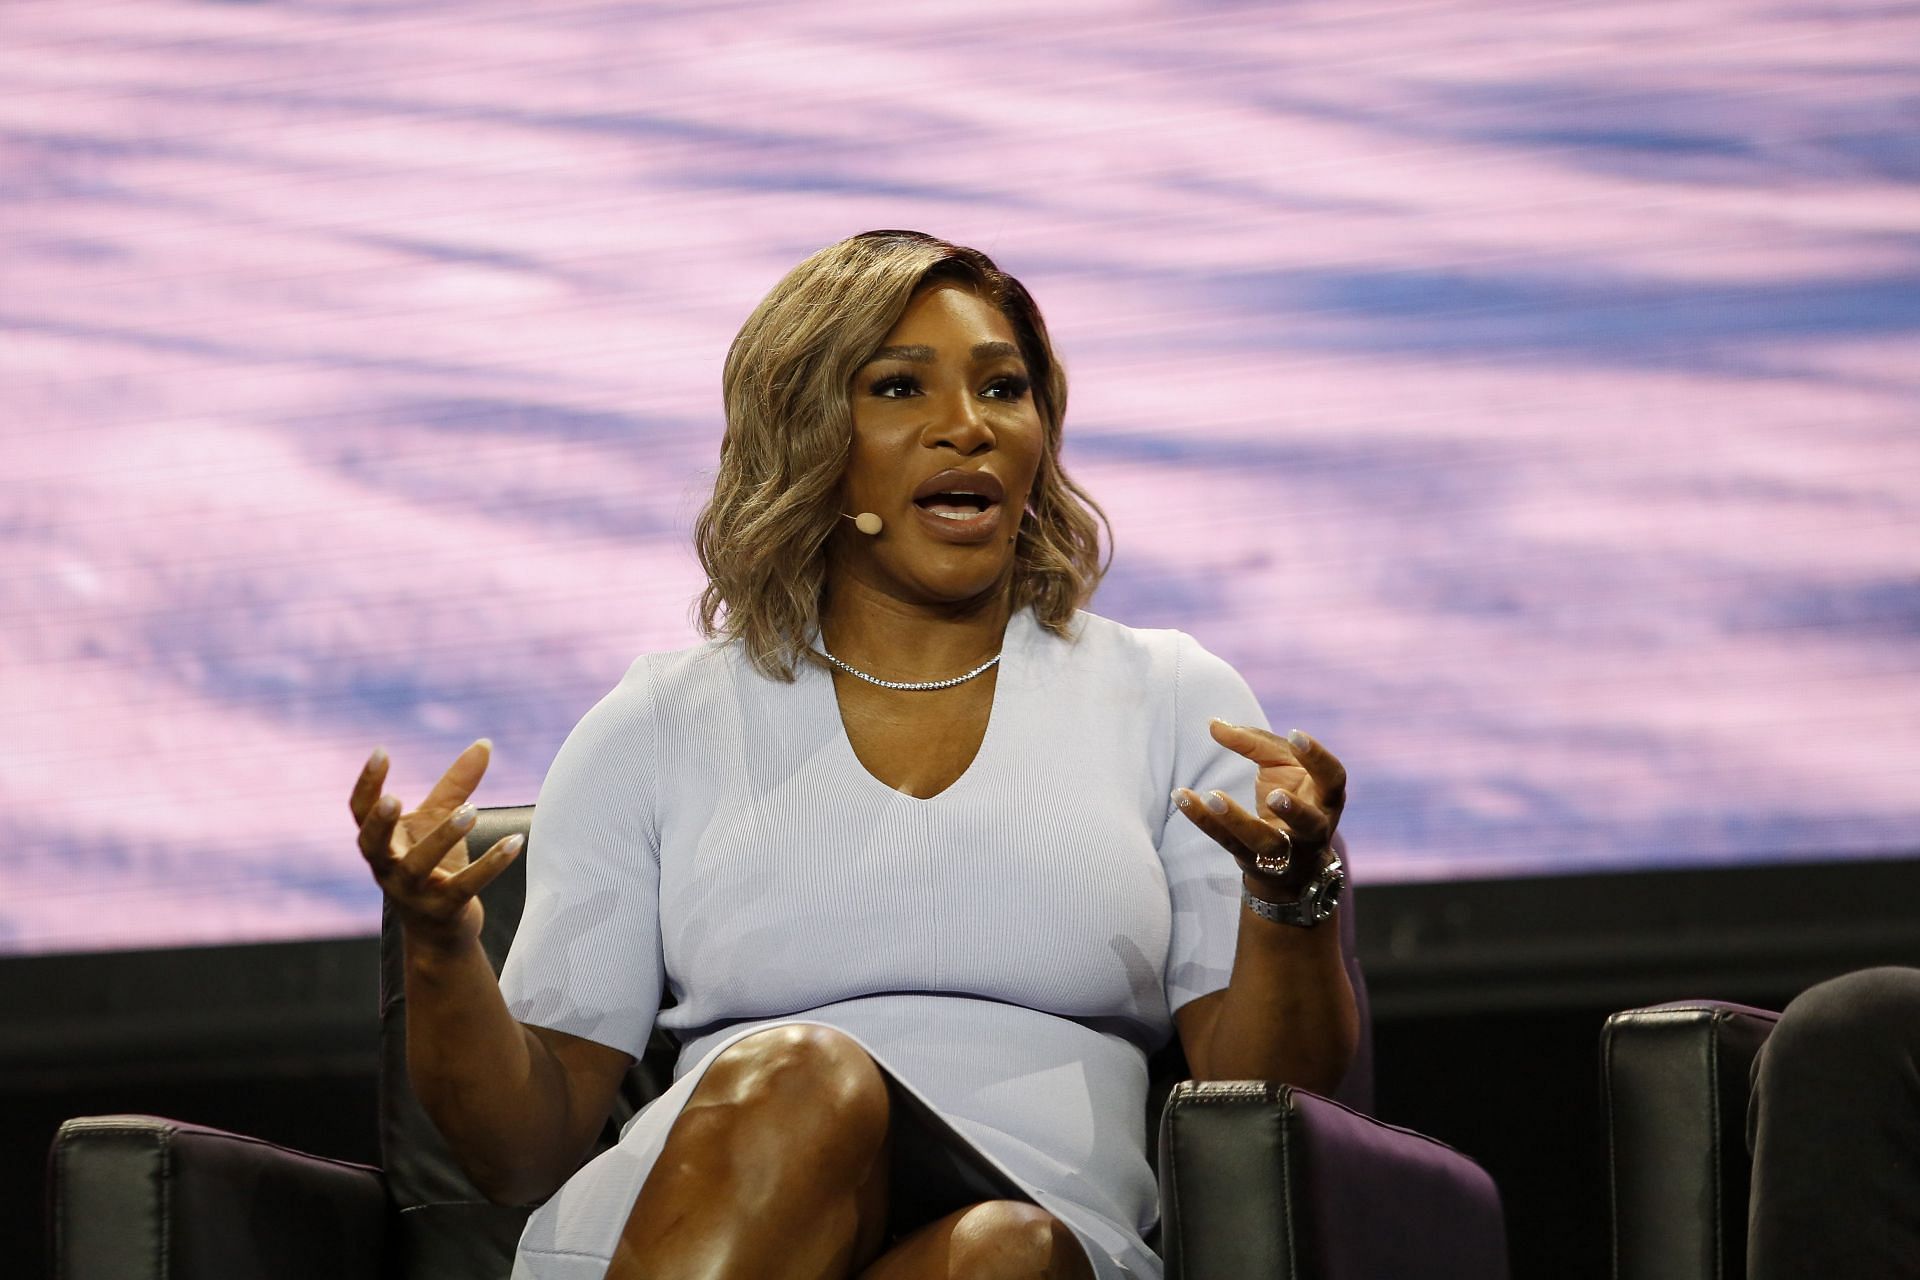 Serena Williams said that she was heartbroken by the Texas school shooting